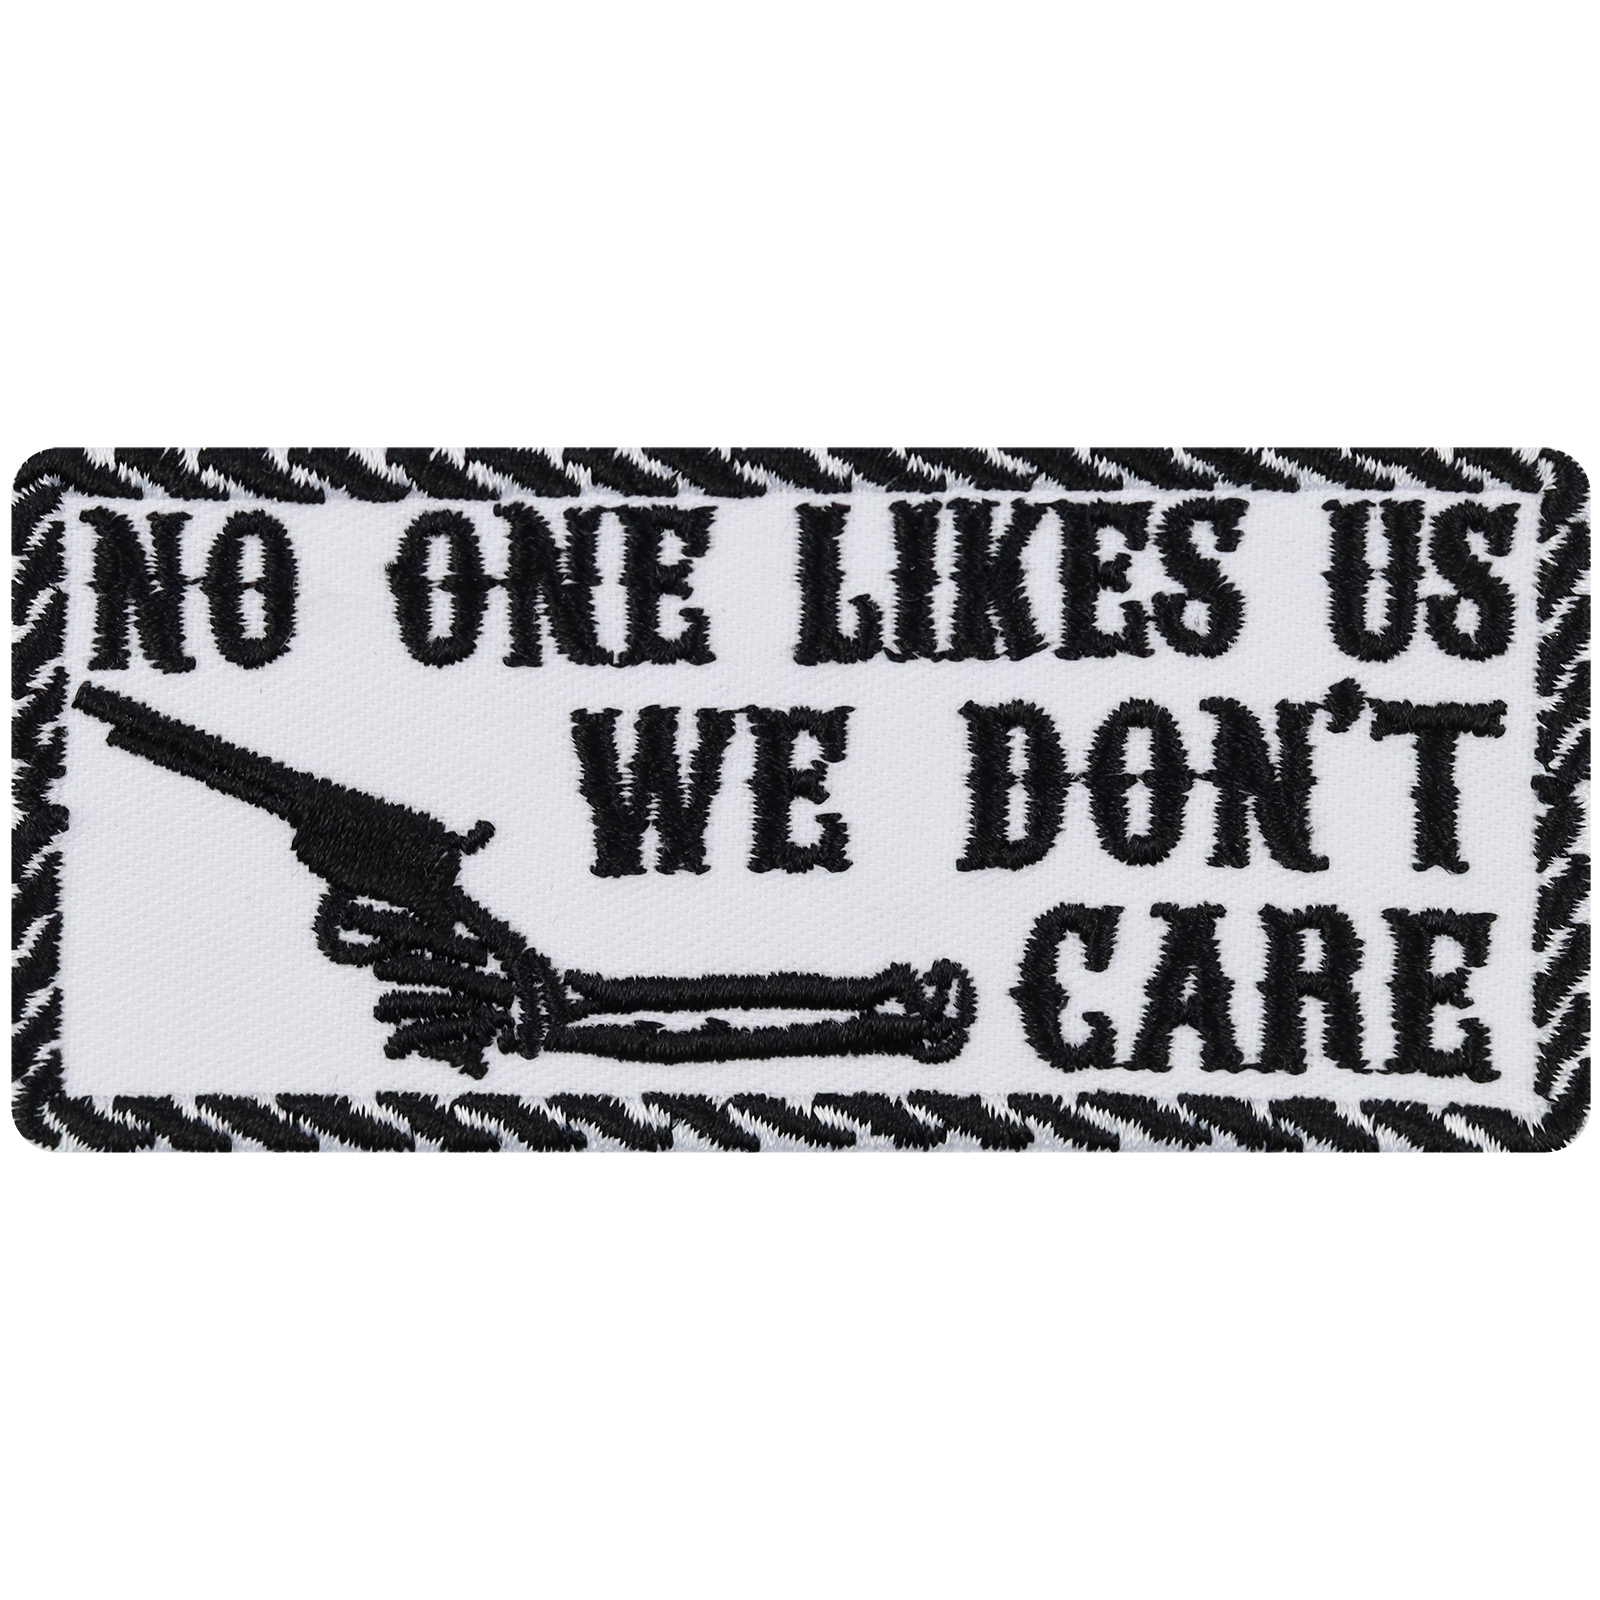 No one likes us we don't care - Patch